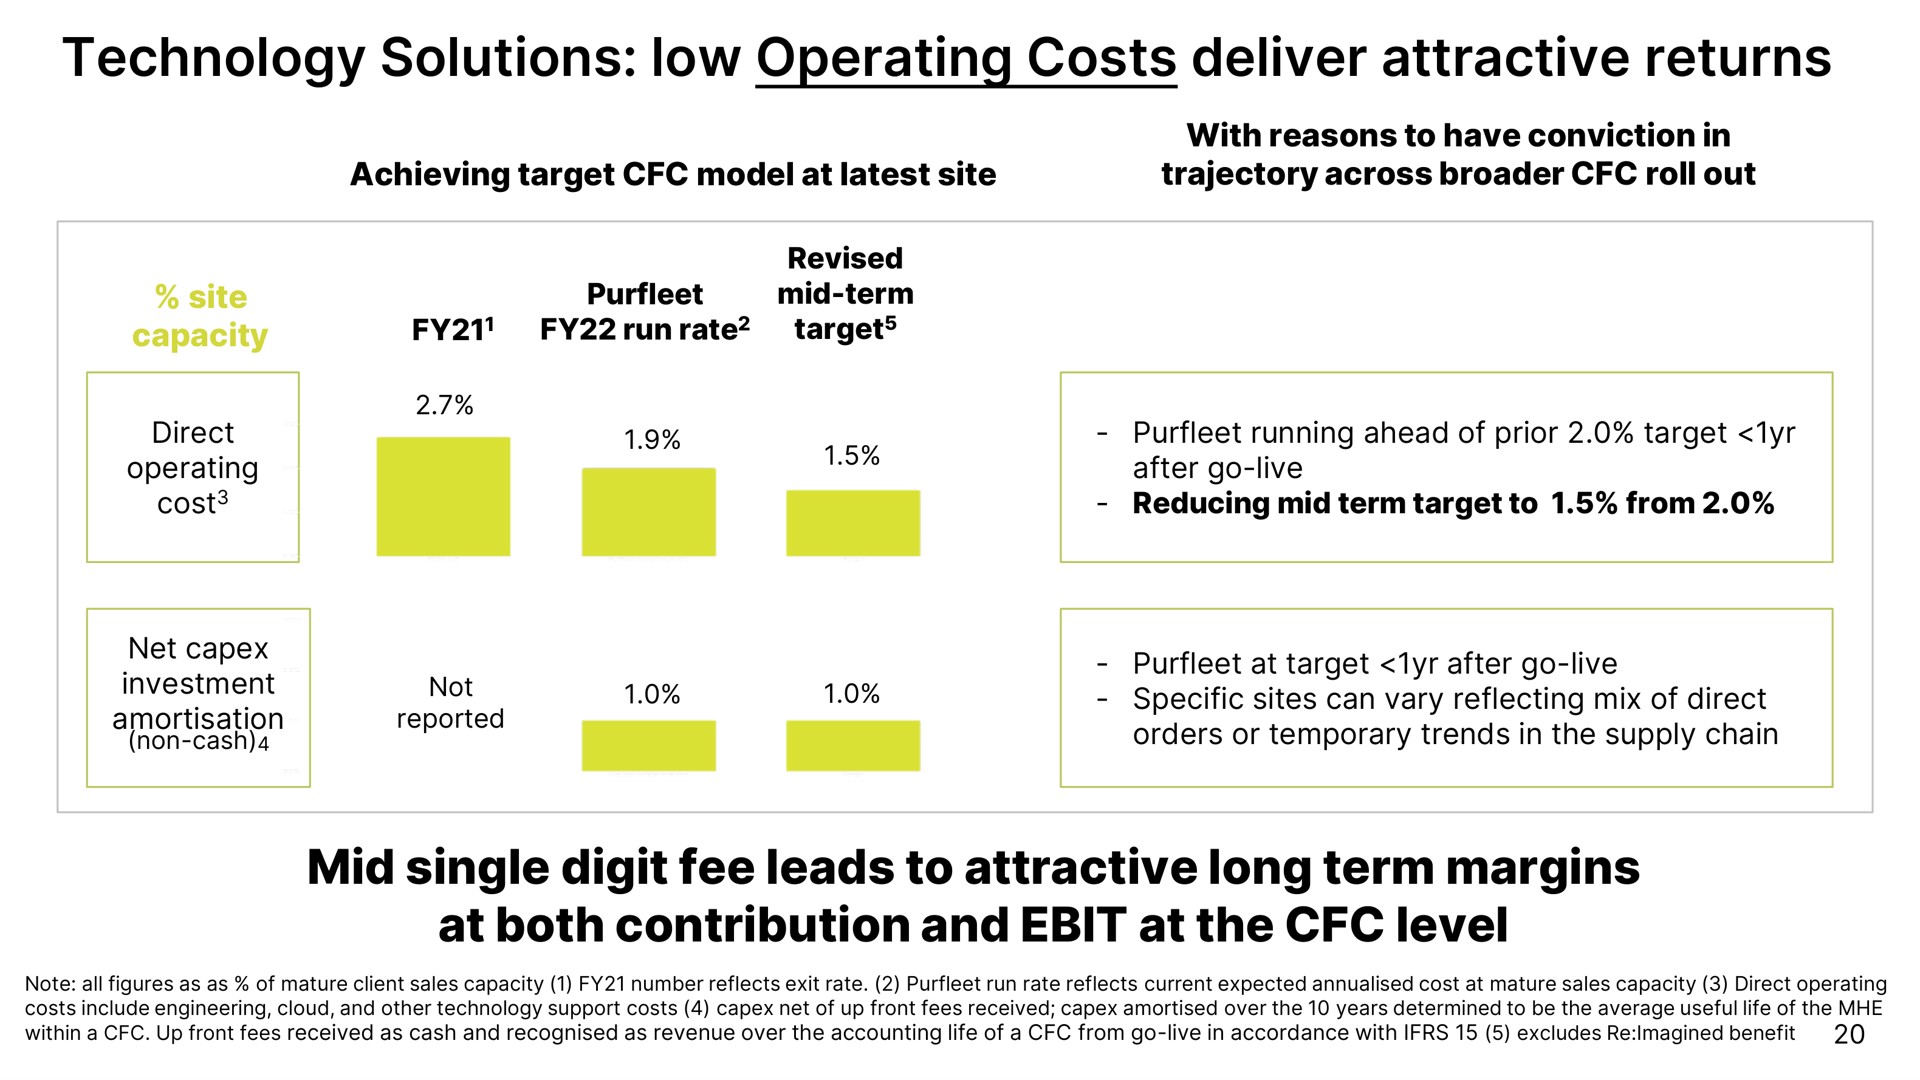 technology solutions low operating costs deliver attractive returns mid single digit fee leads to attractive long term margins at both contribution and at the level | Ocado